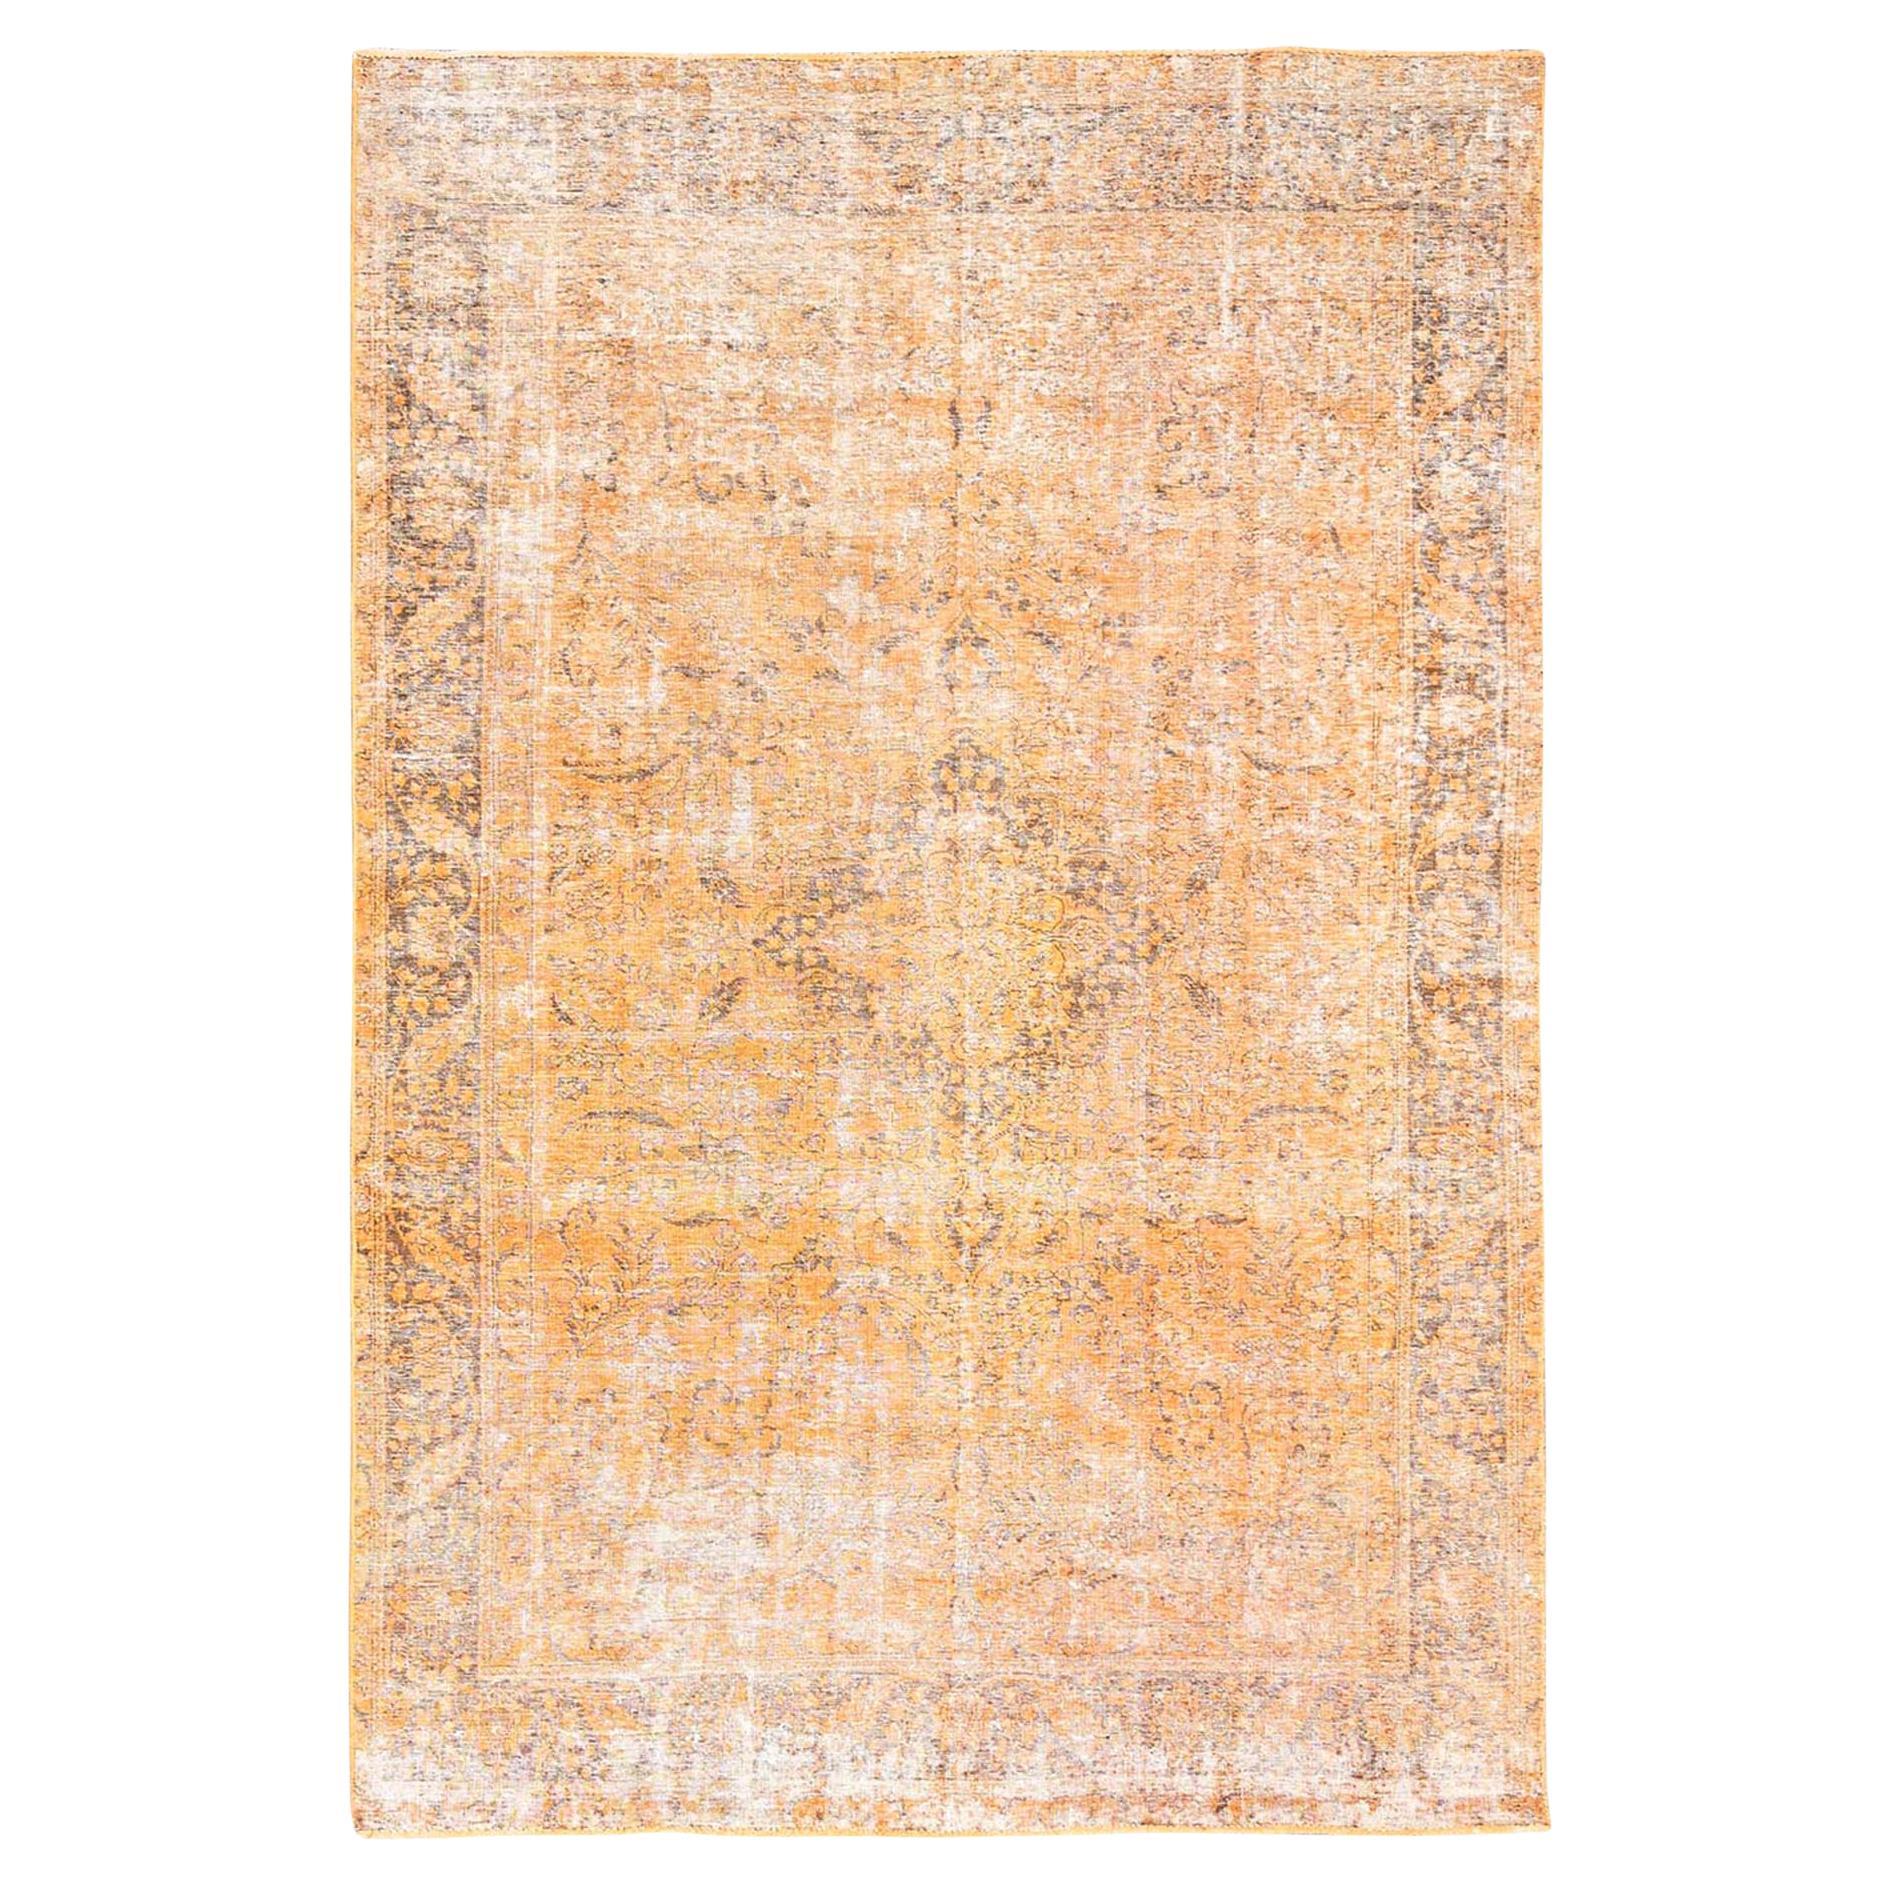 Carrot Orange Rustic Look Soft Wool Hand Knotted Vintage Persian Tabriz Rug For Sale